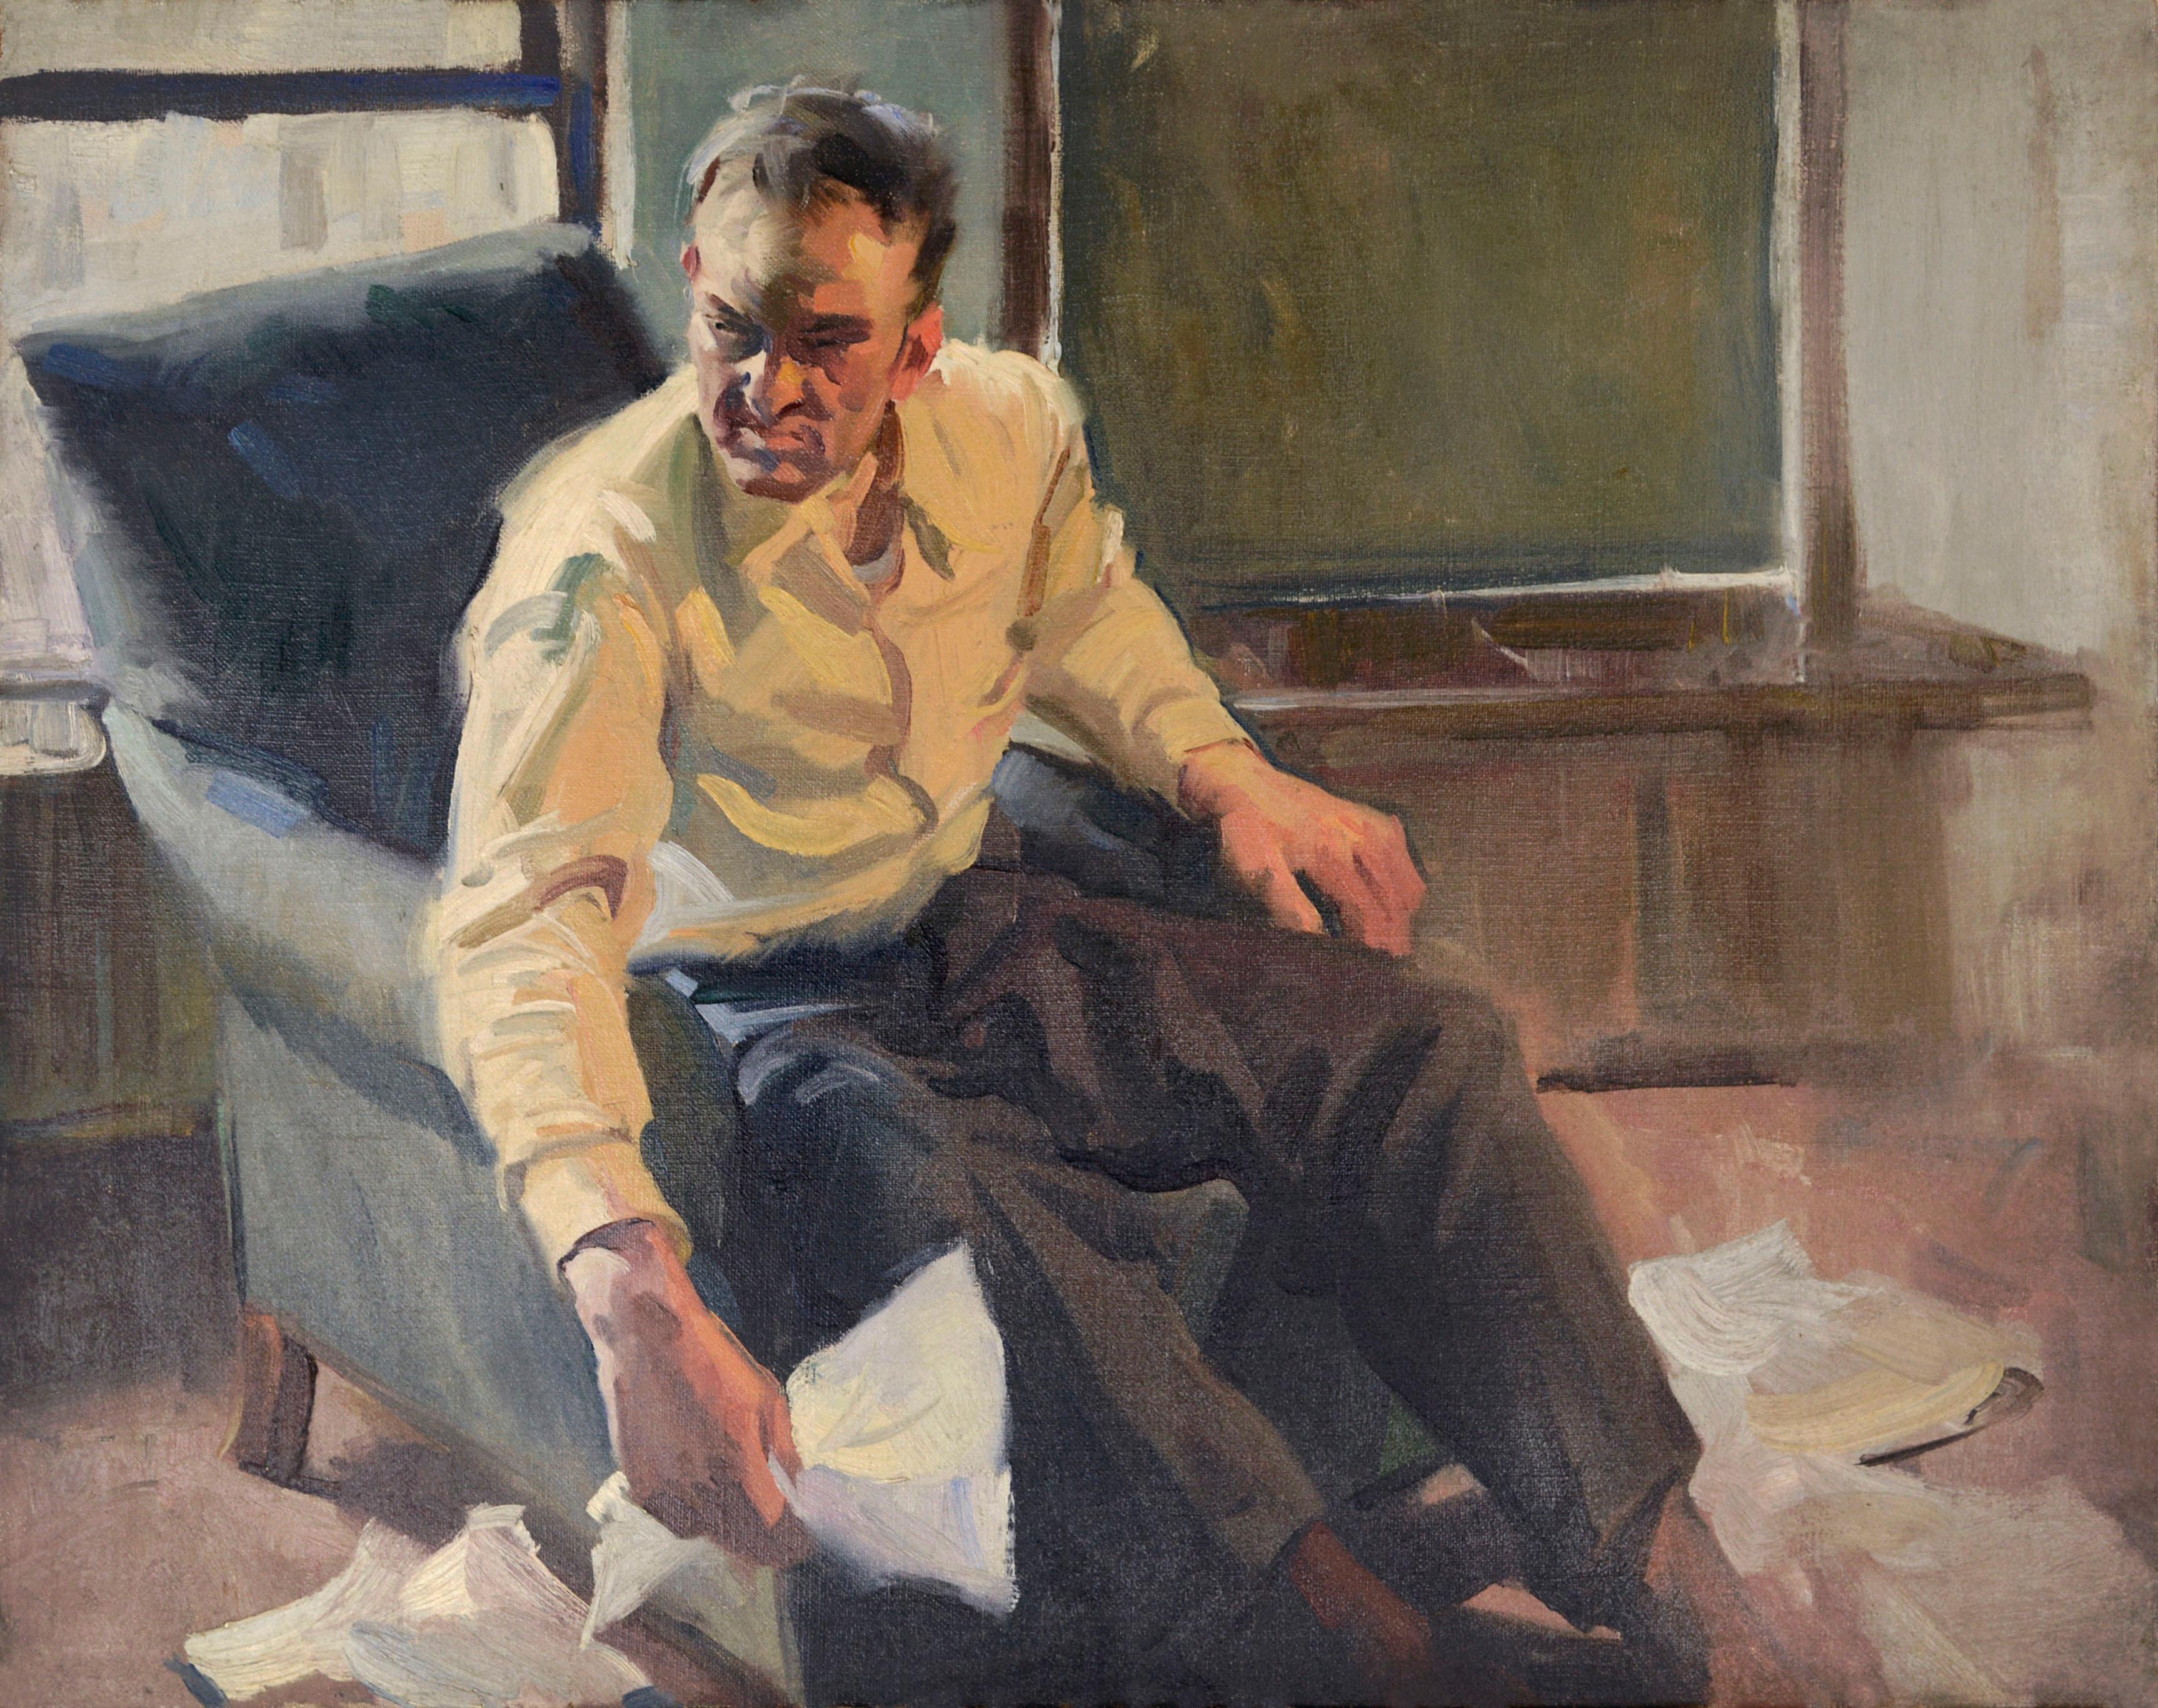 Charles Kinghan Figurative Painting - Portrait of a Man in Armchair, Mid Century Short Story Illustration